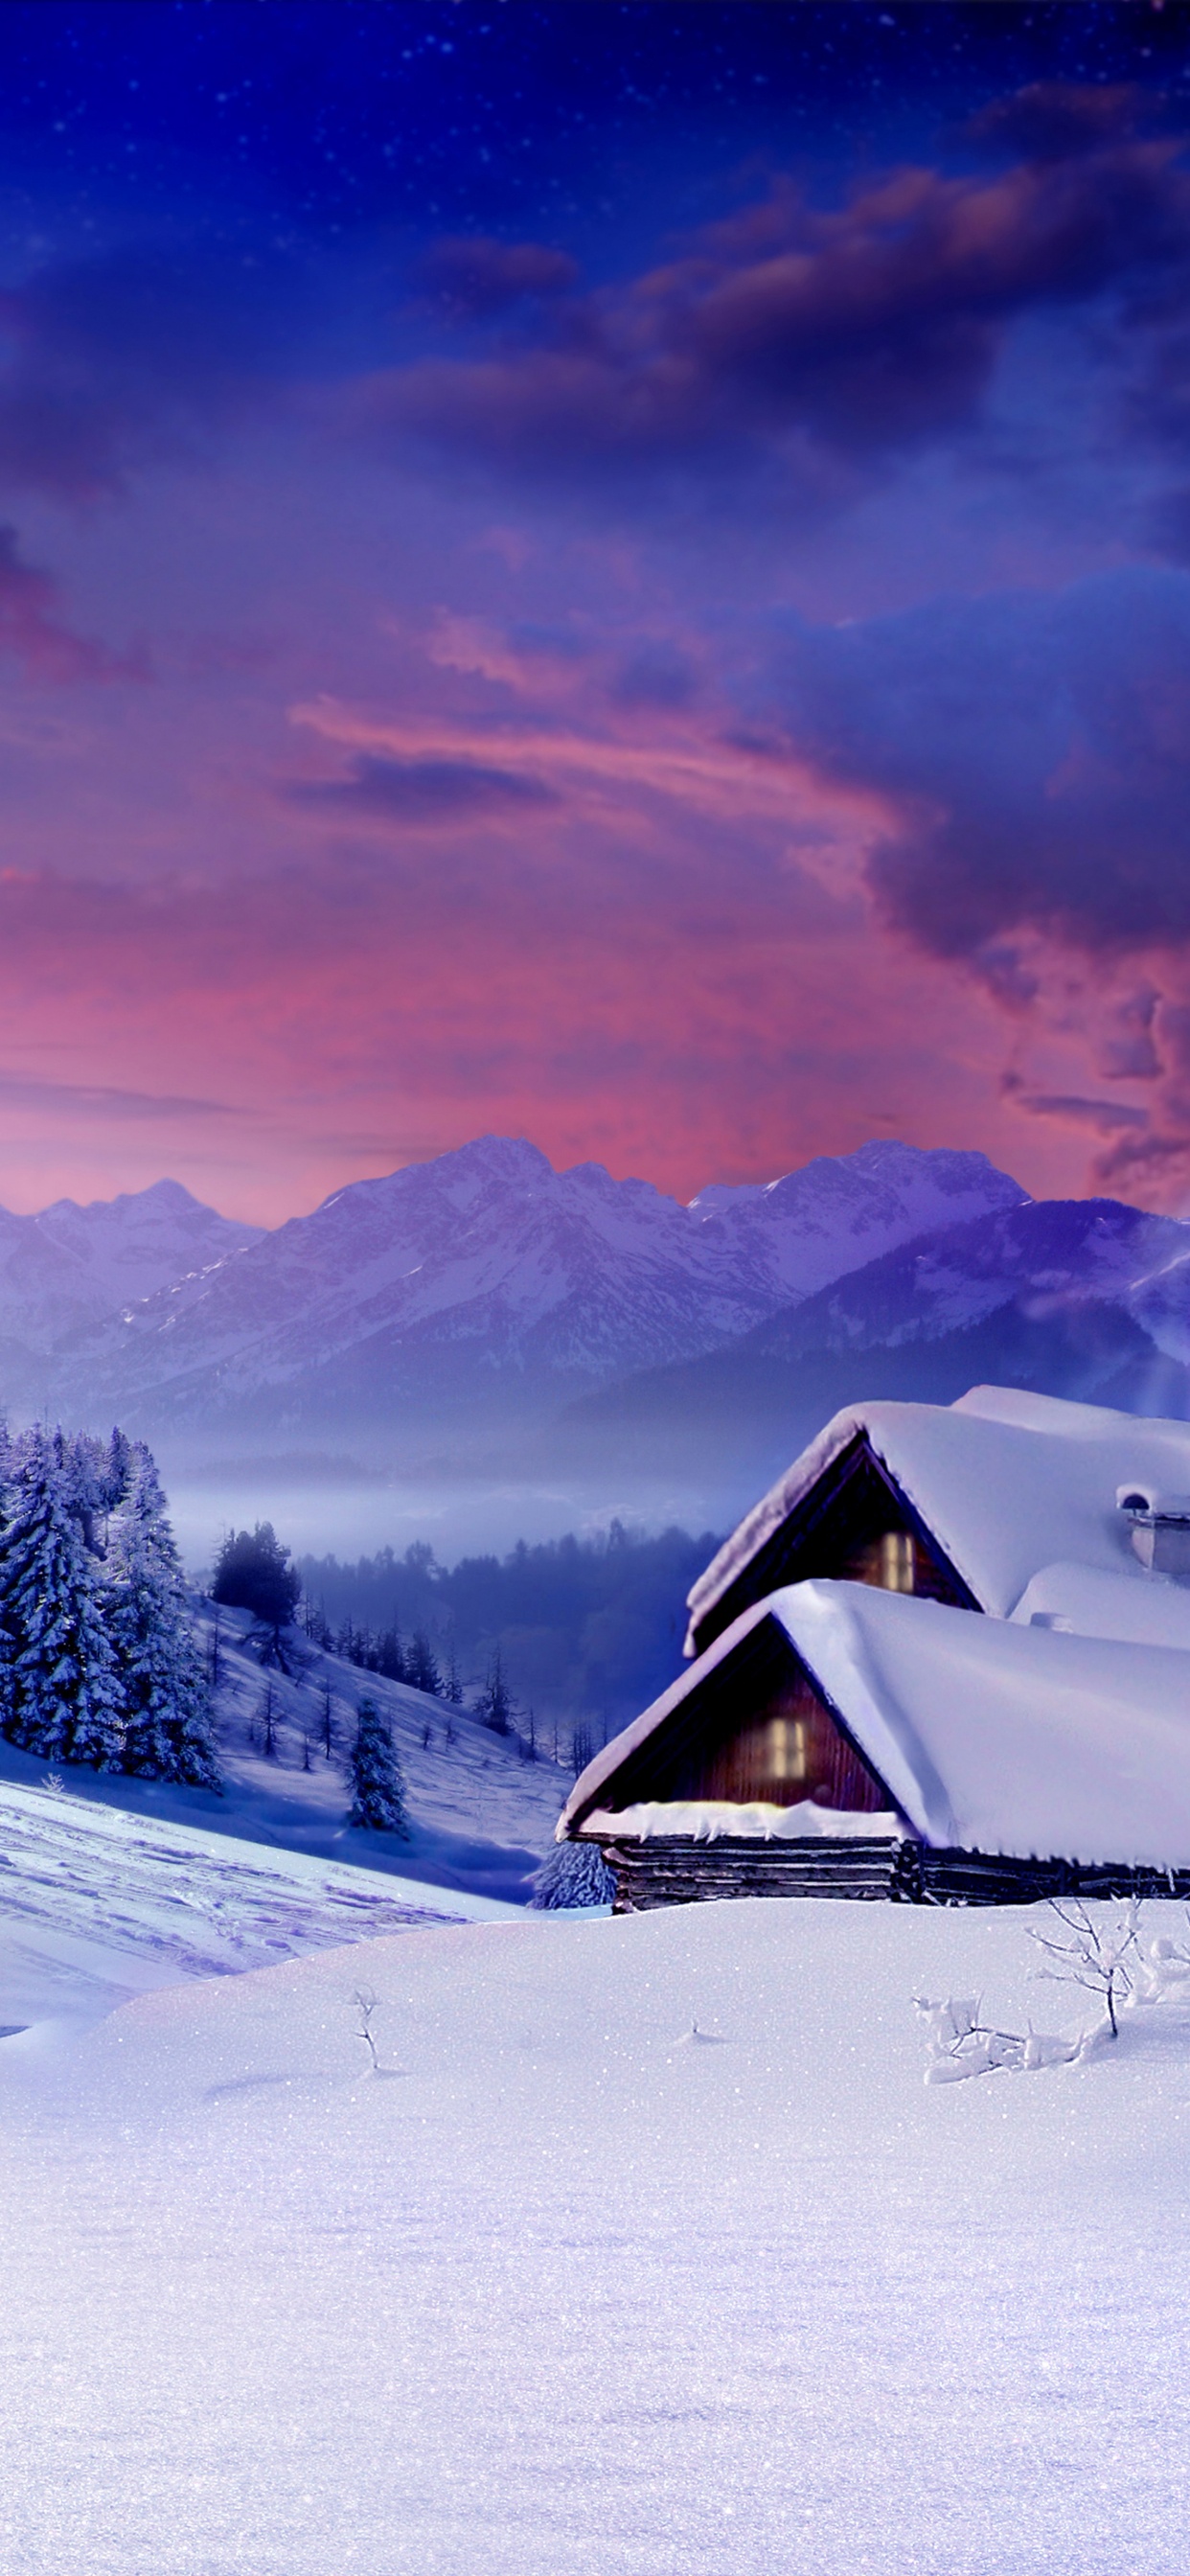 Brown Wooden House on Snow Covered Ground Near Trees and Mountains During Daytime. Wallpaper in 1242x2688 Resolution